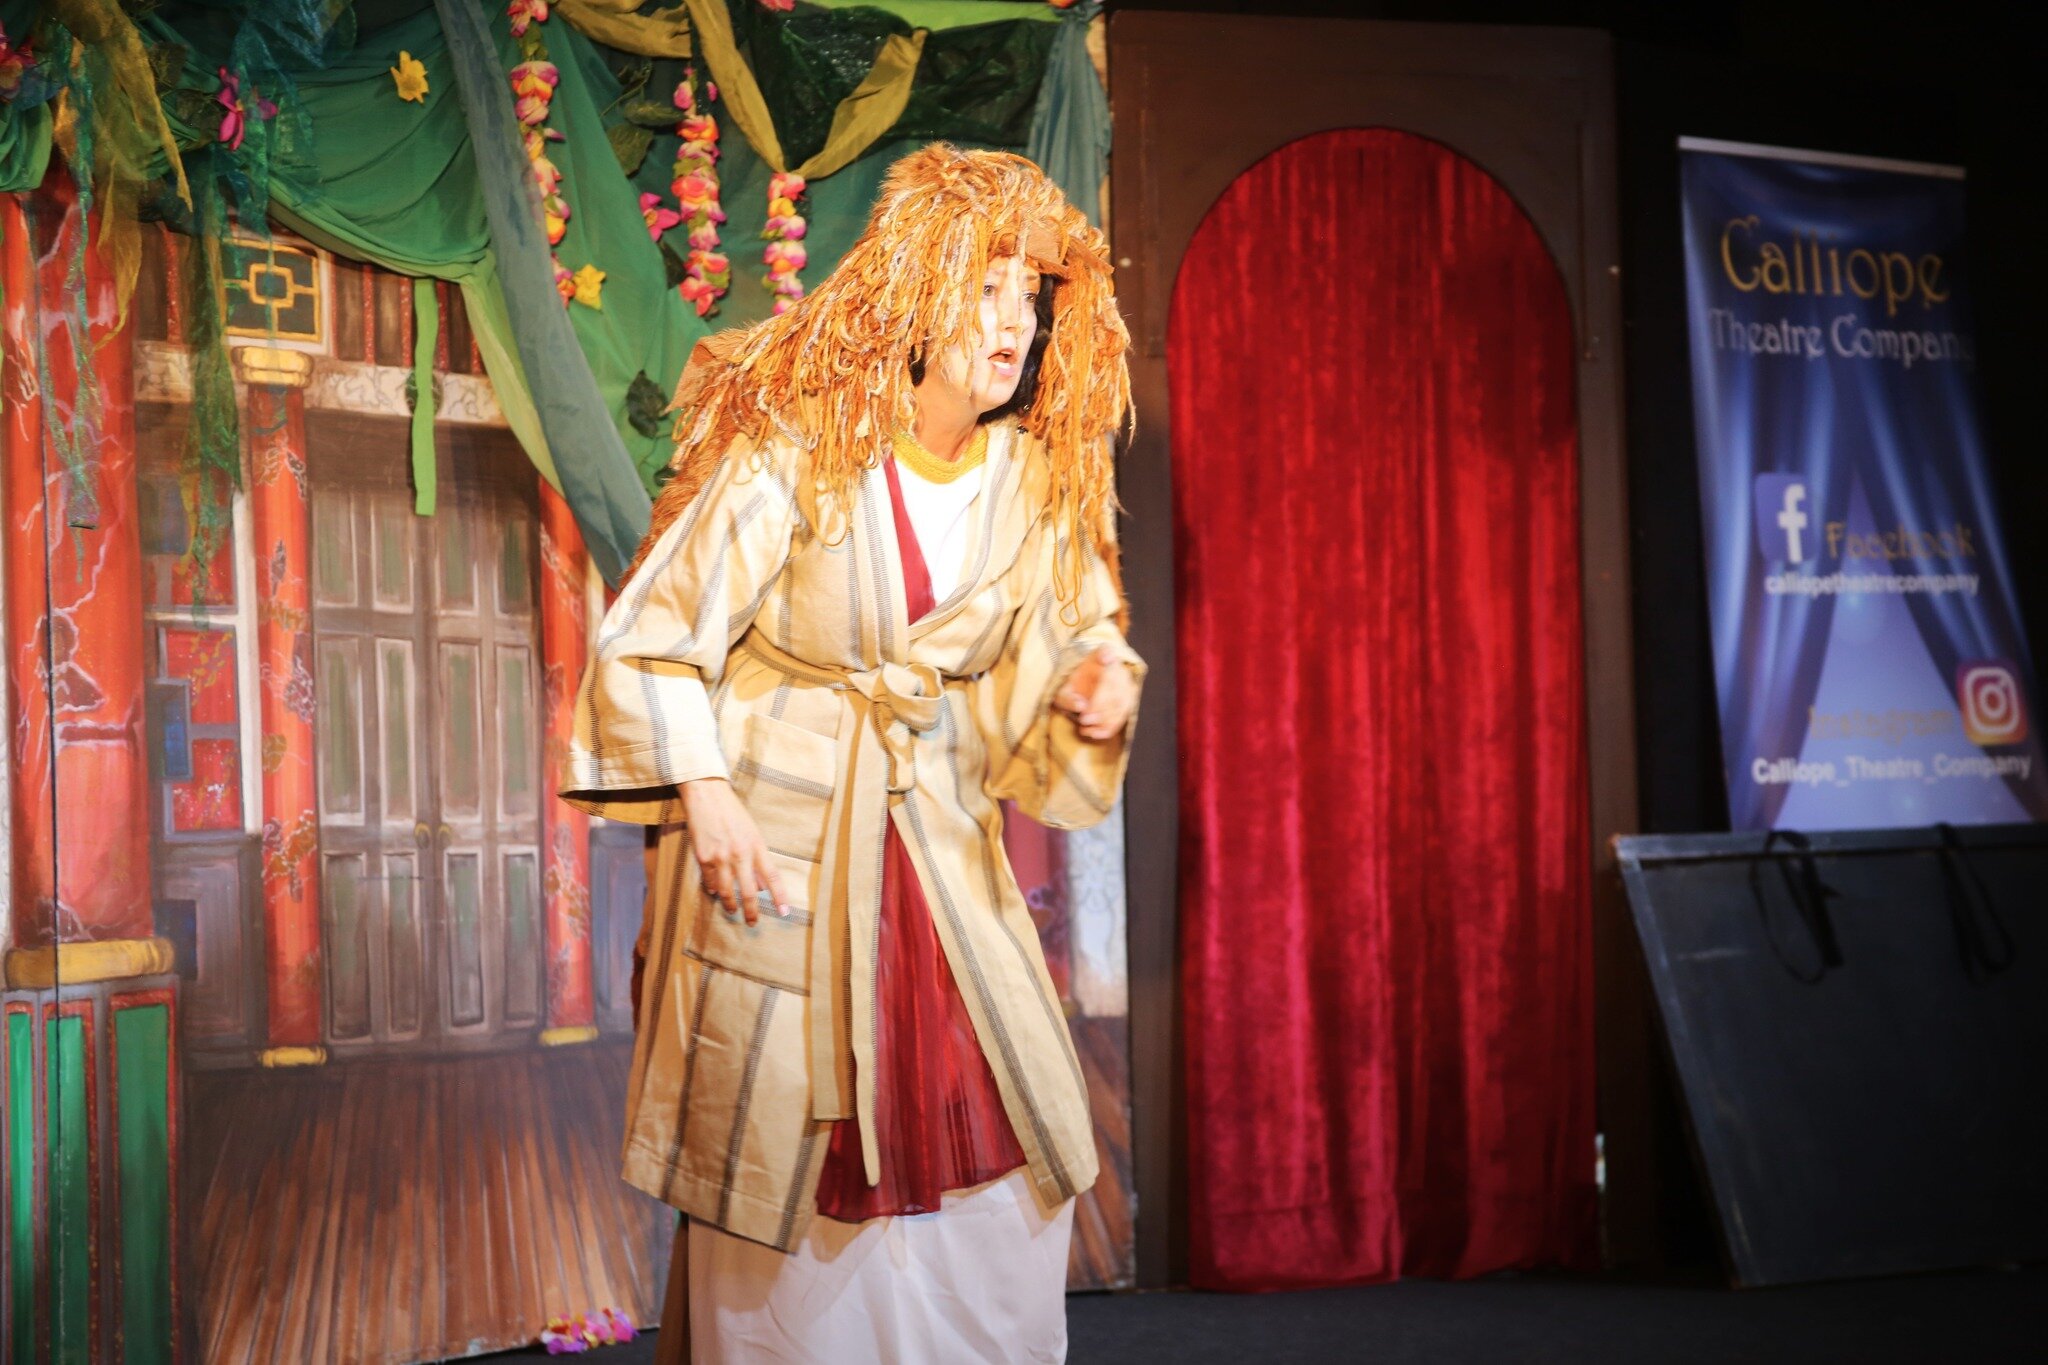 Snug the Joiner plays 'Lion' in the terrible play, Pyramus and Thisbe, during Calliope's A Midsummer Night's Dream!

 #educationaltheatre #childrenstheater #theatre #musicaltheater #childrenstheatre #educationaltheater #teatroeducativo #performingart